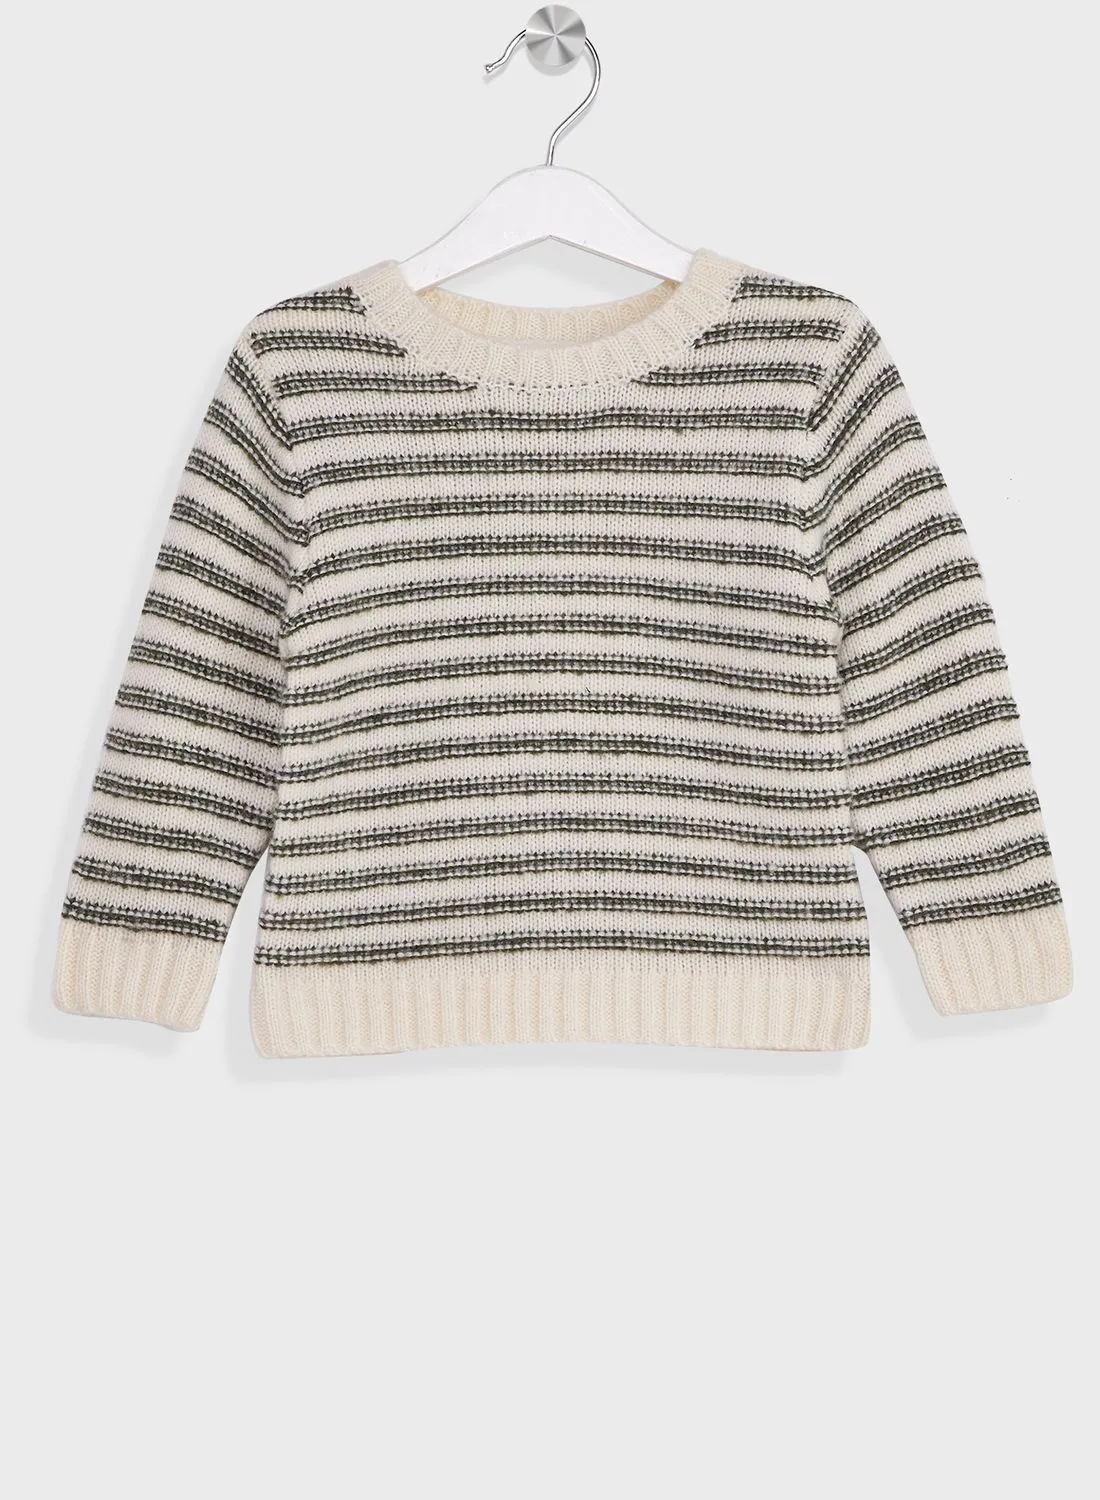 NAME IT Kids Knitted Sweater